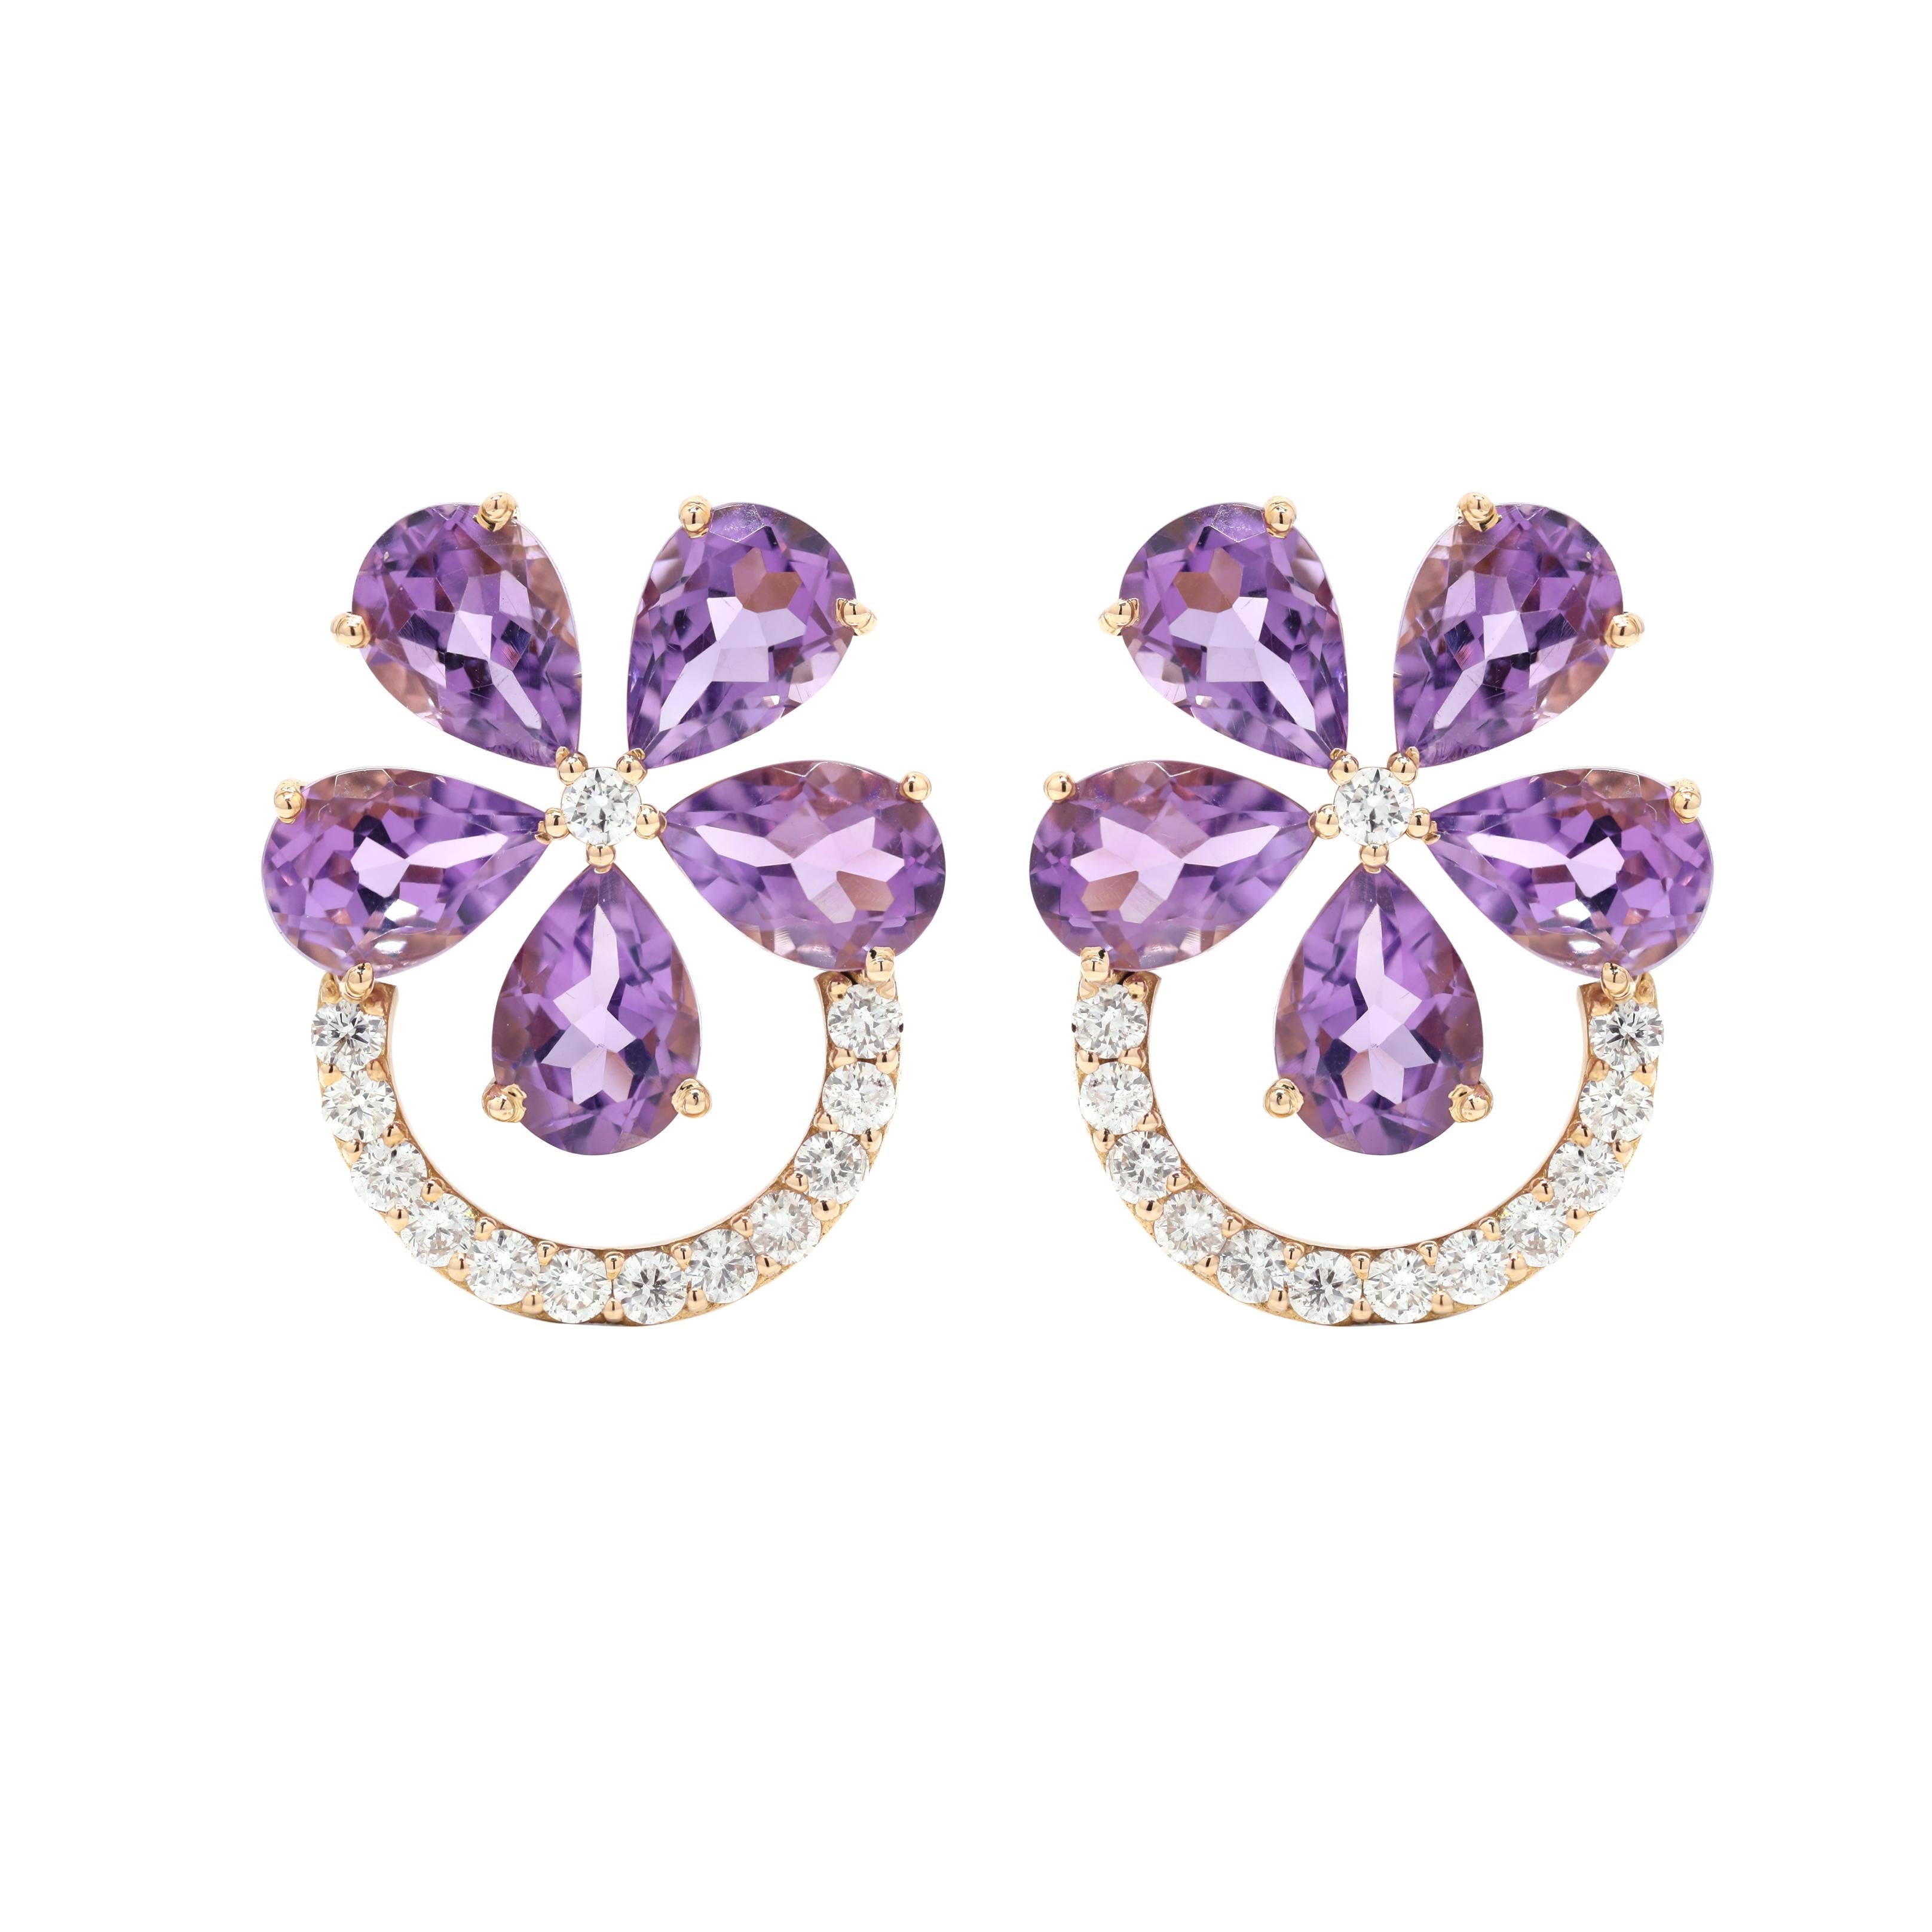 Pear cut amethyst studs with diamonds in 14K gold. Embrace your look with these stunning pair of earrings suitable for any occasion to complete your outfit.
Studs create a subtle beauty while showcasing the colors of the natural precious gemstones